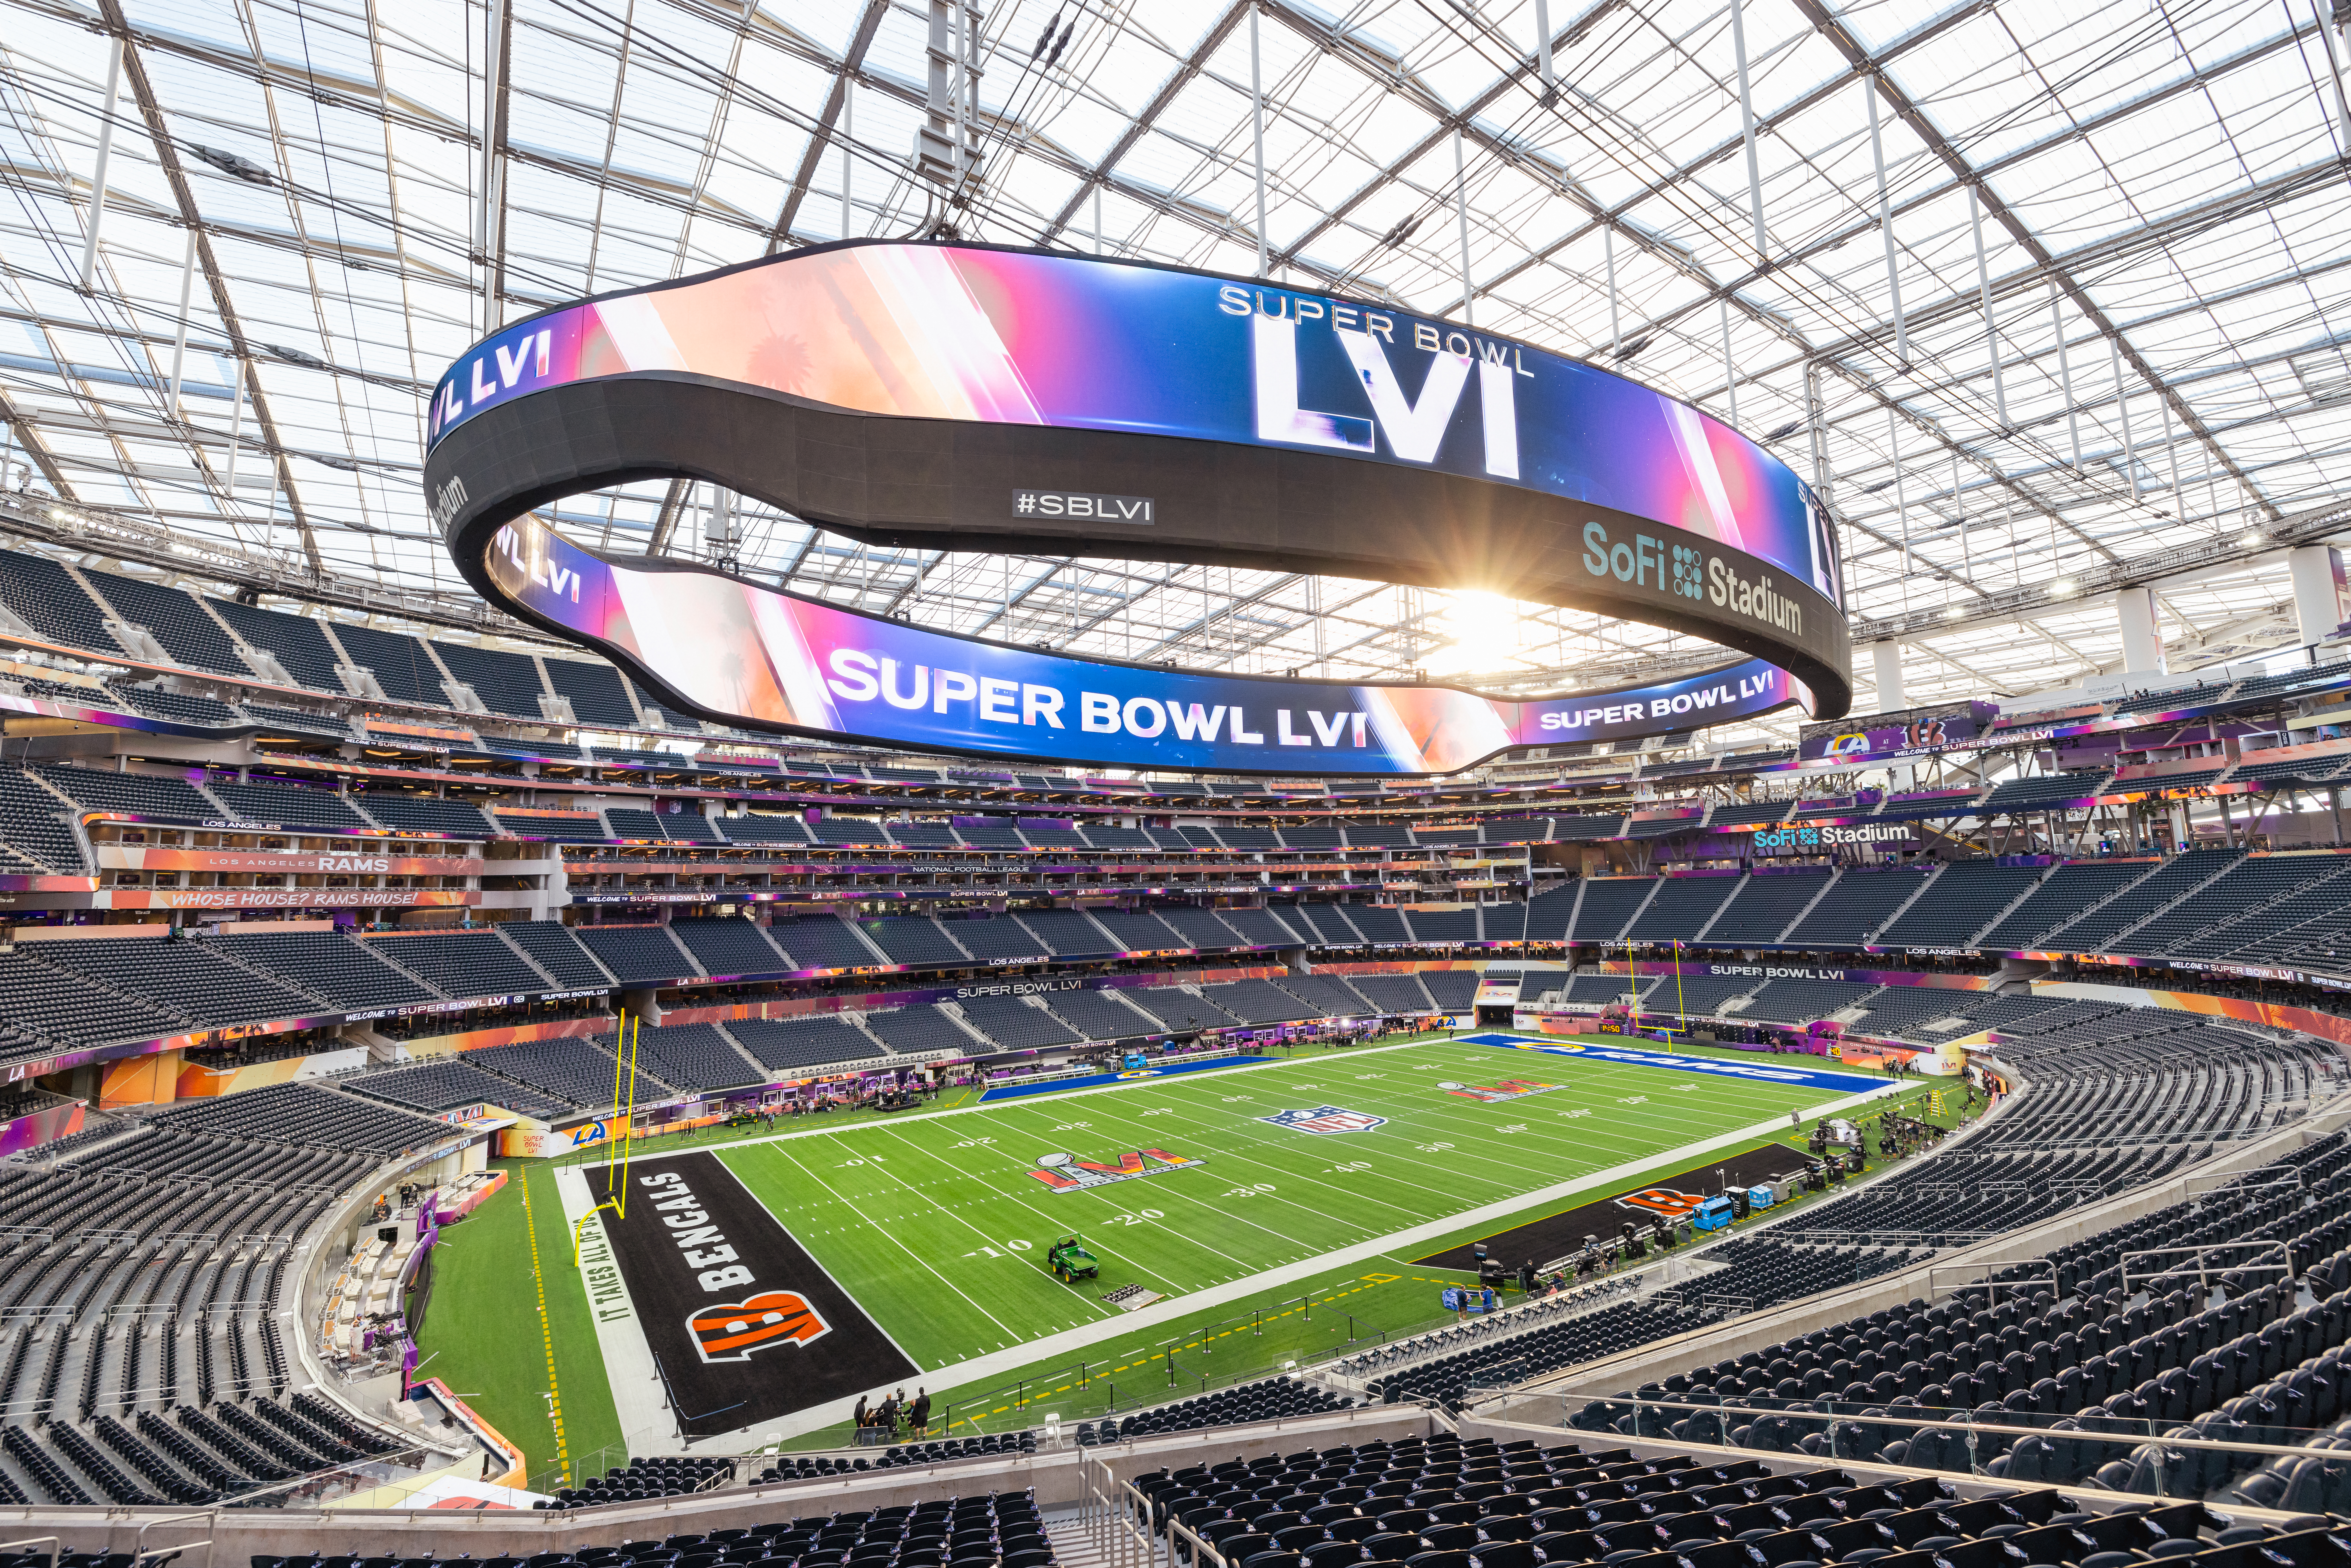 Van Wagner Productions developed creative for the LED graphics over centerfield at Super Bowl 2022